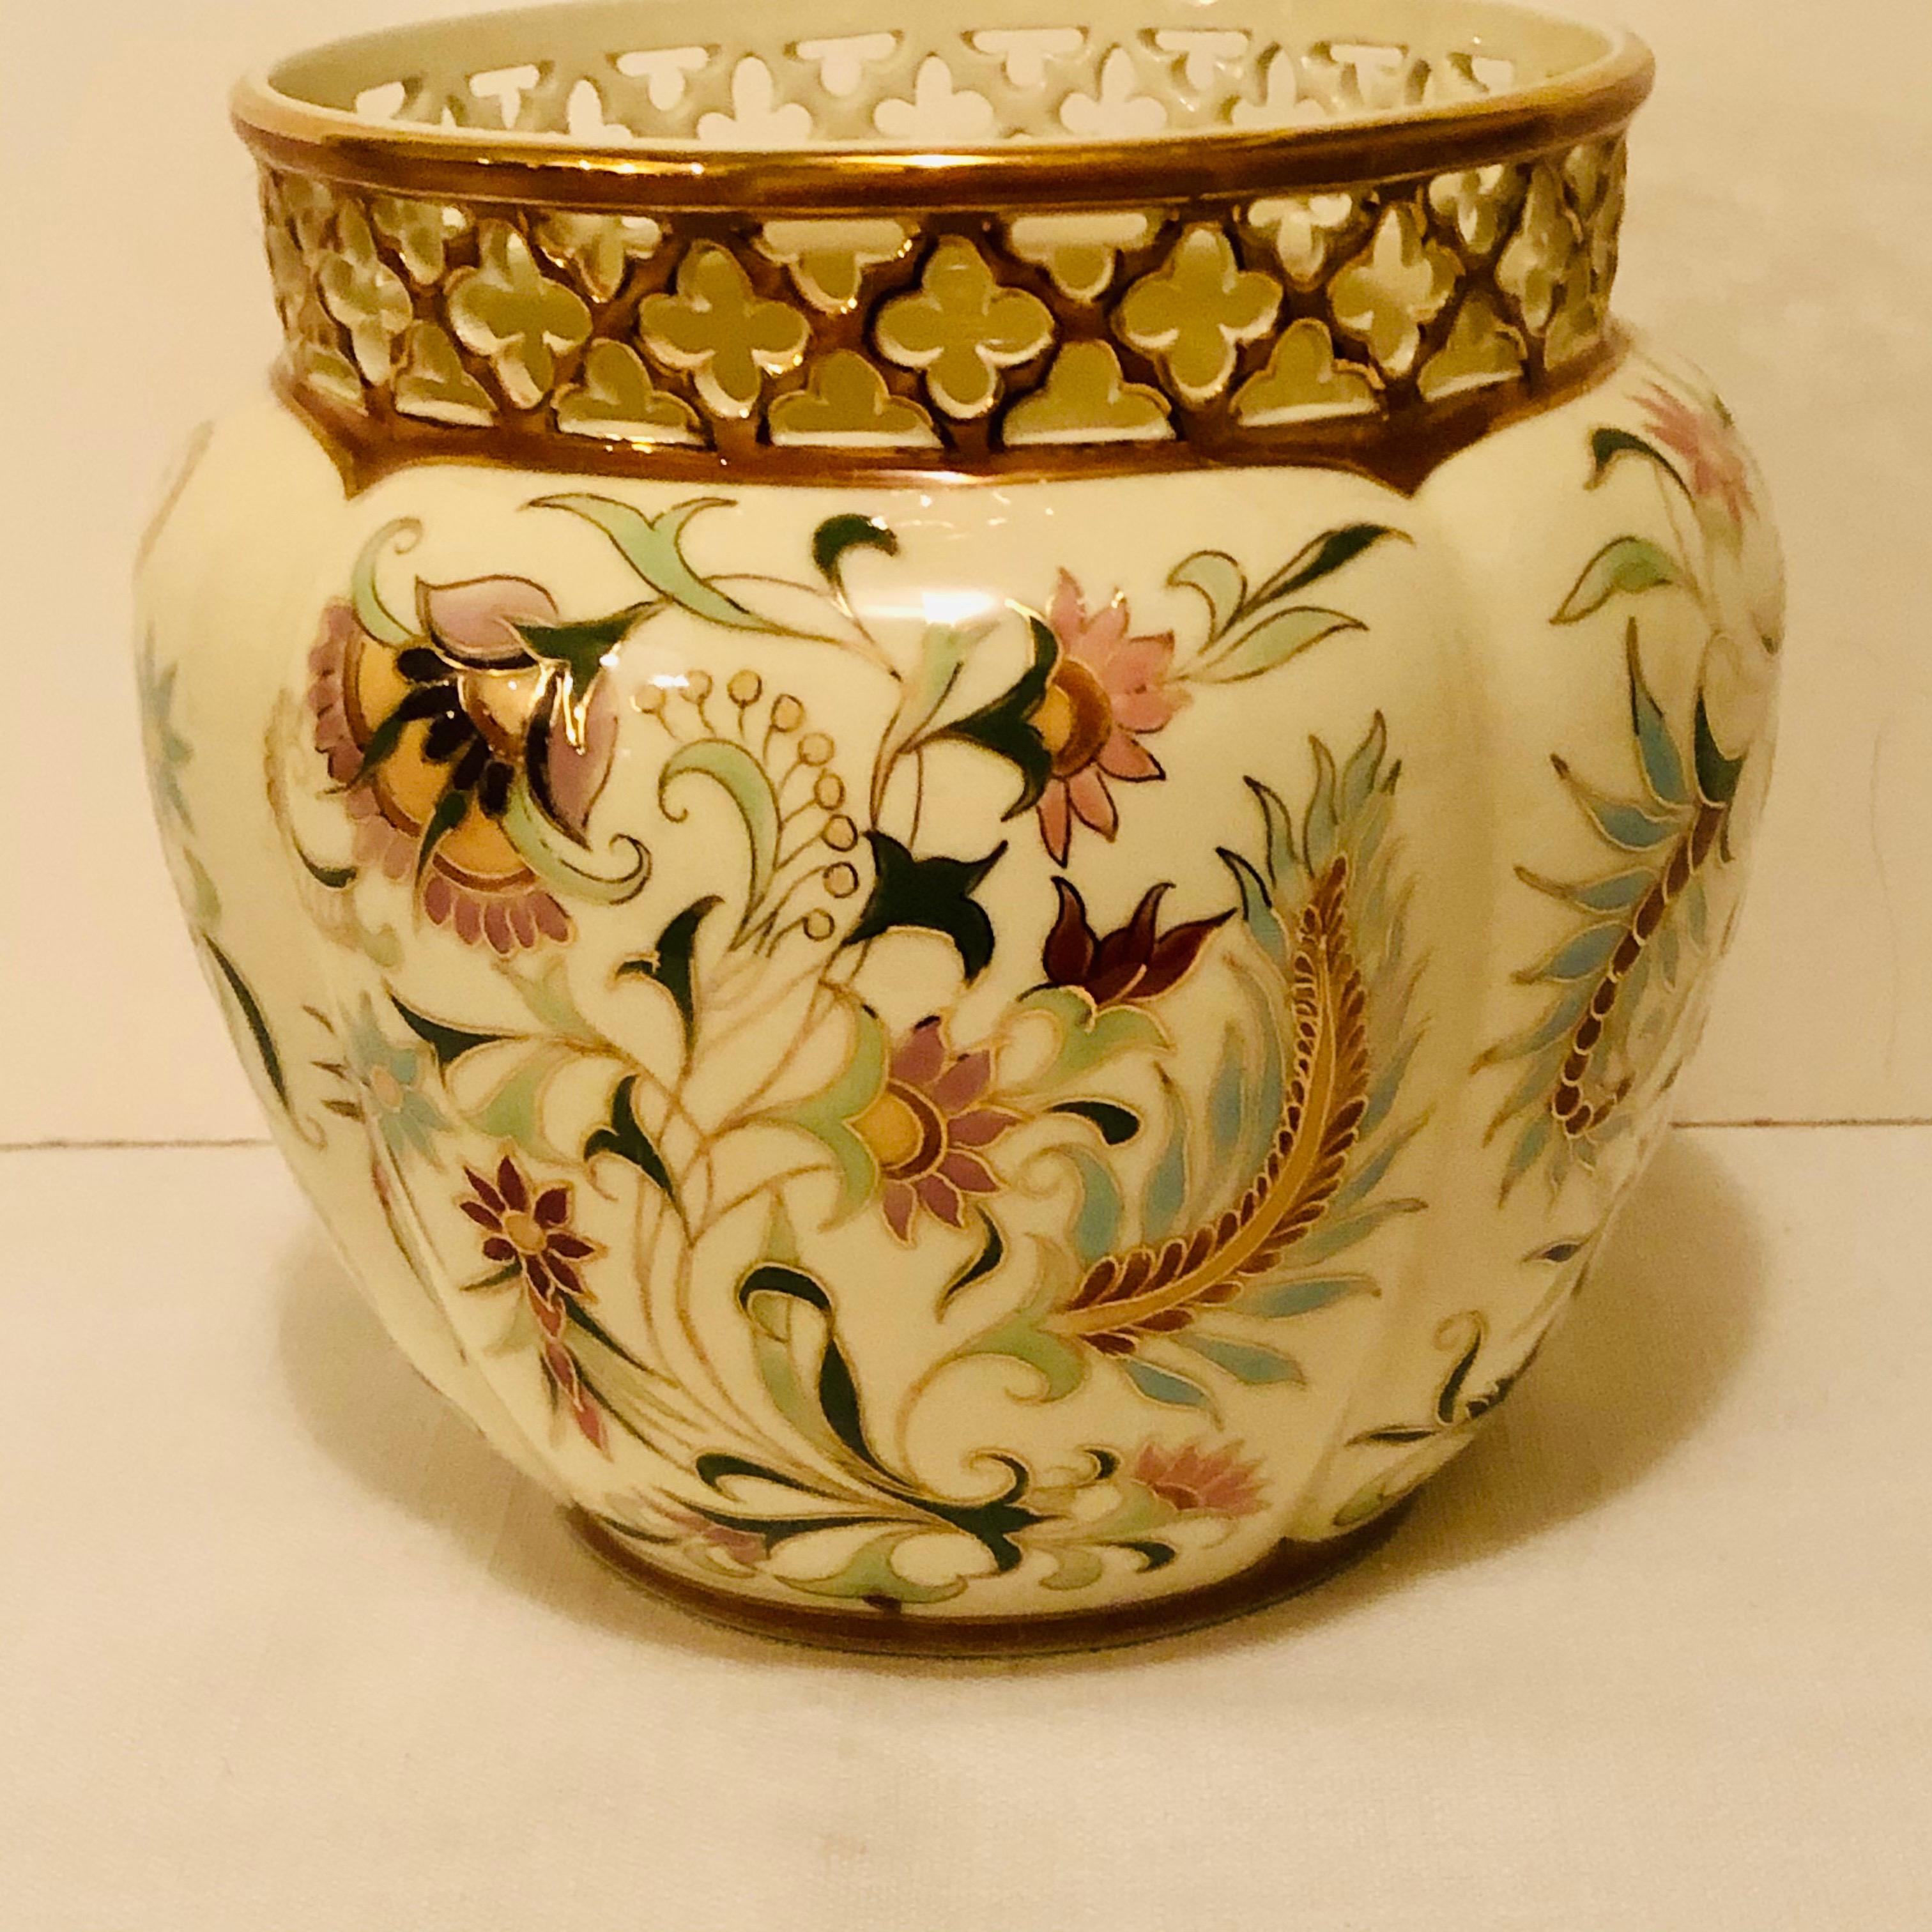 Wonderful Zsolnay jardinière painted with a wonderful colorful flower and leaf decoration in pink, green, purple, orange, maroon and yellow. The top of the jardinière has a lovely reticulated pattern around the top. It would be a stunning decoration